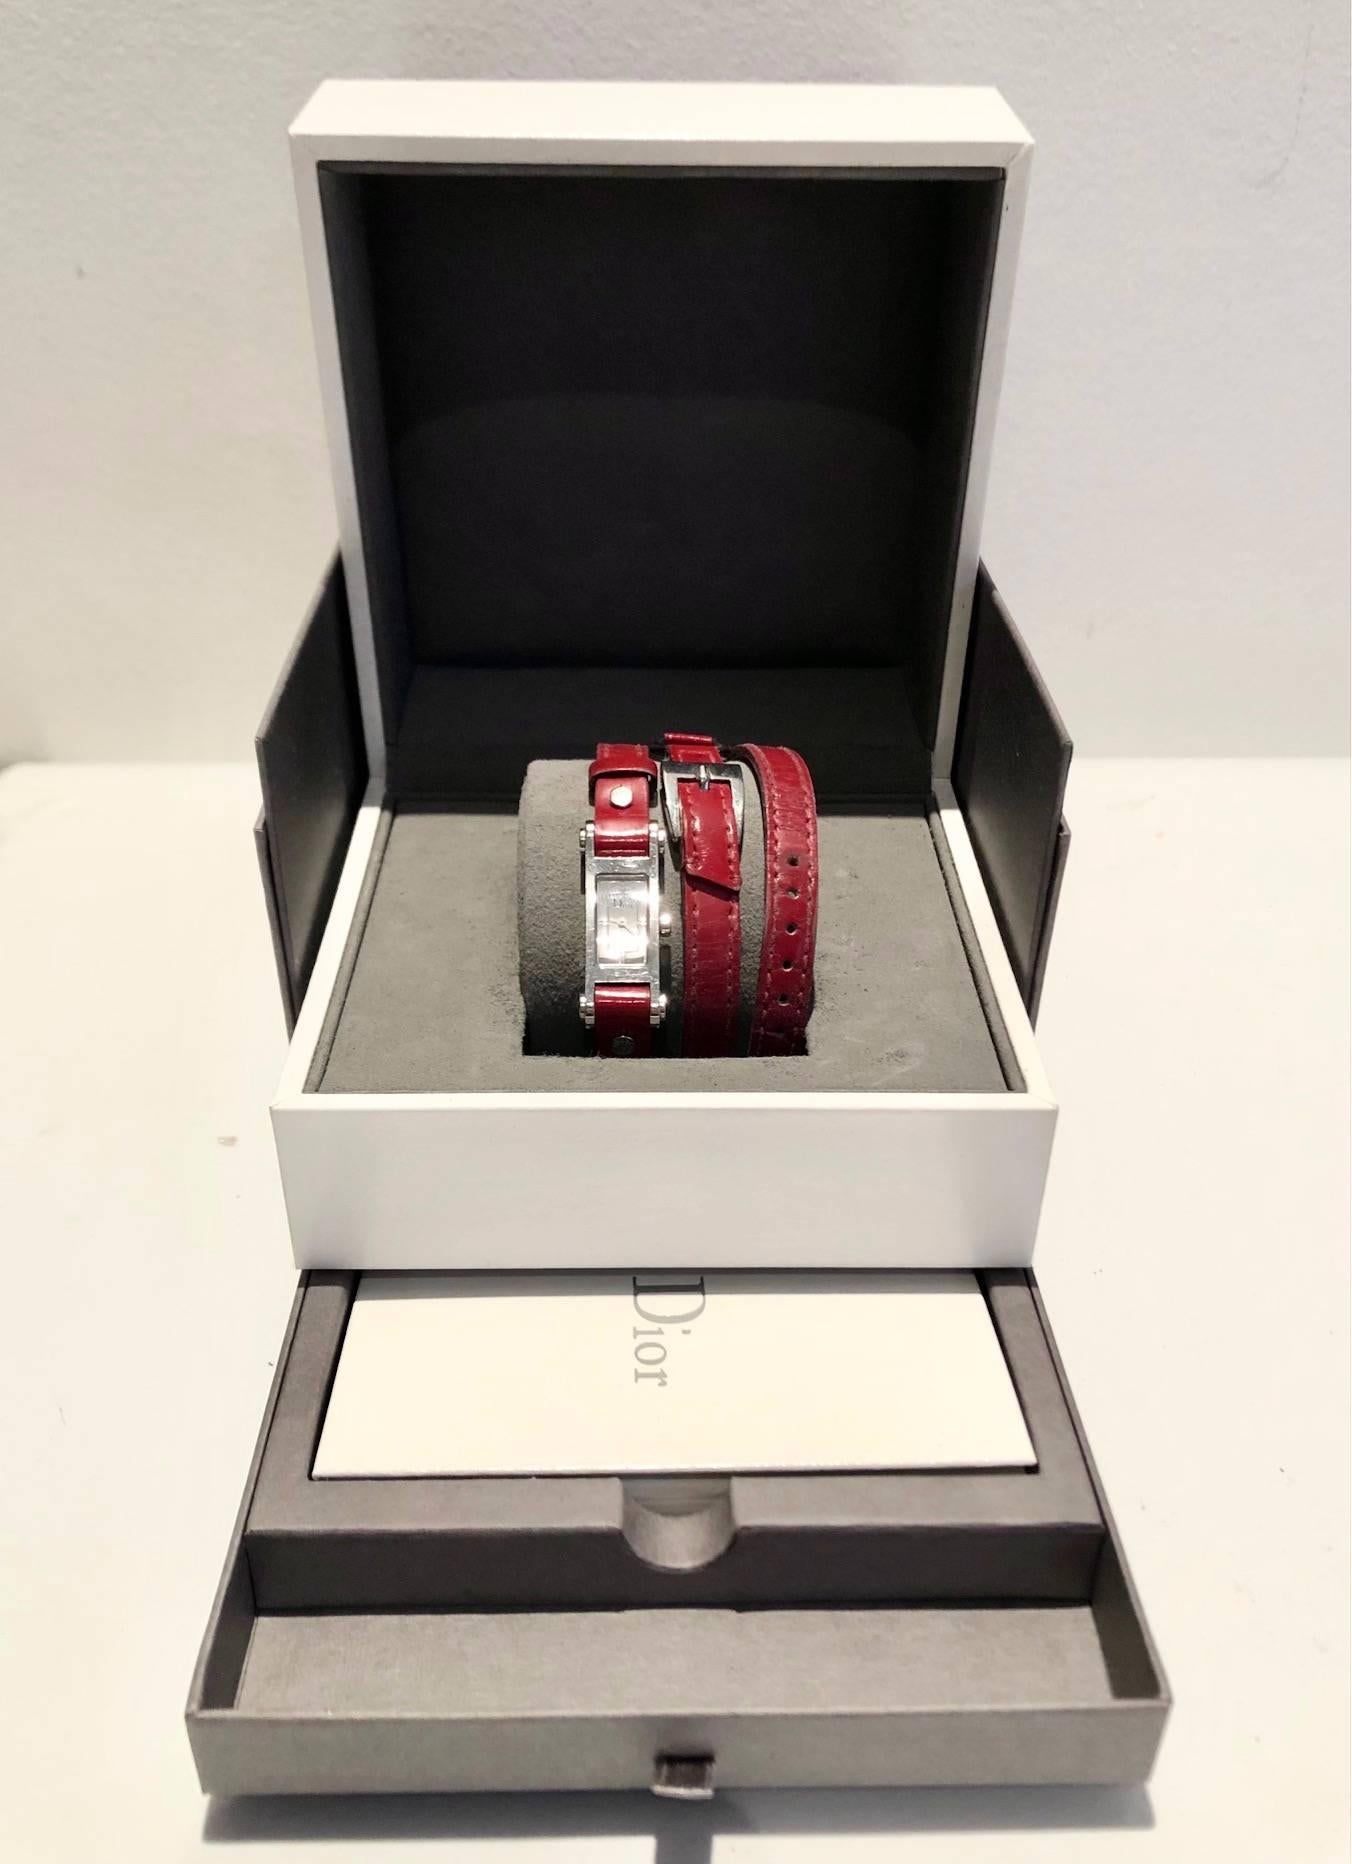 FREE UK and WORLDWIDE DELIVERY 

Christian Dior 'Dior 66' model watch, fine red leather double tour strap, slim rectangular shape with a silver face in a polished steel case, featuring the simple ‘Dior’ logo in black. 

Condition: 2005, vintage,